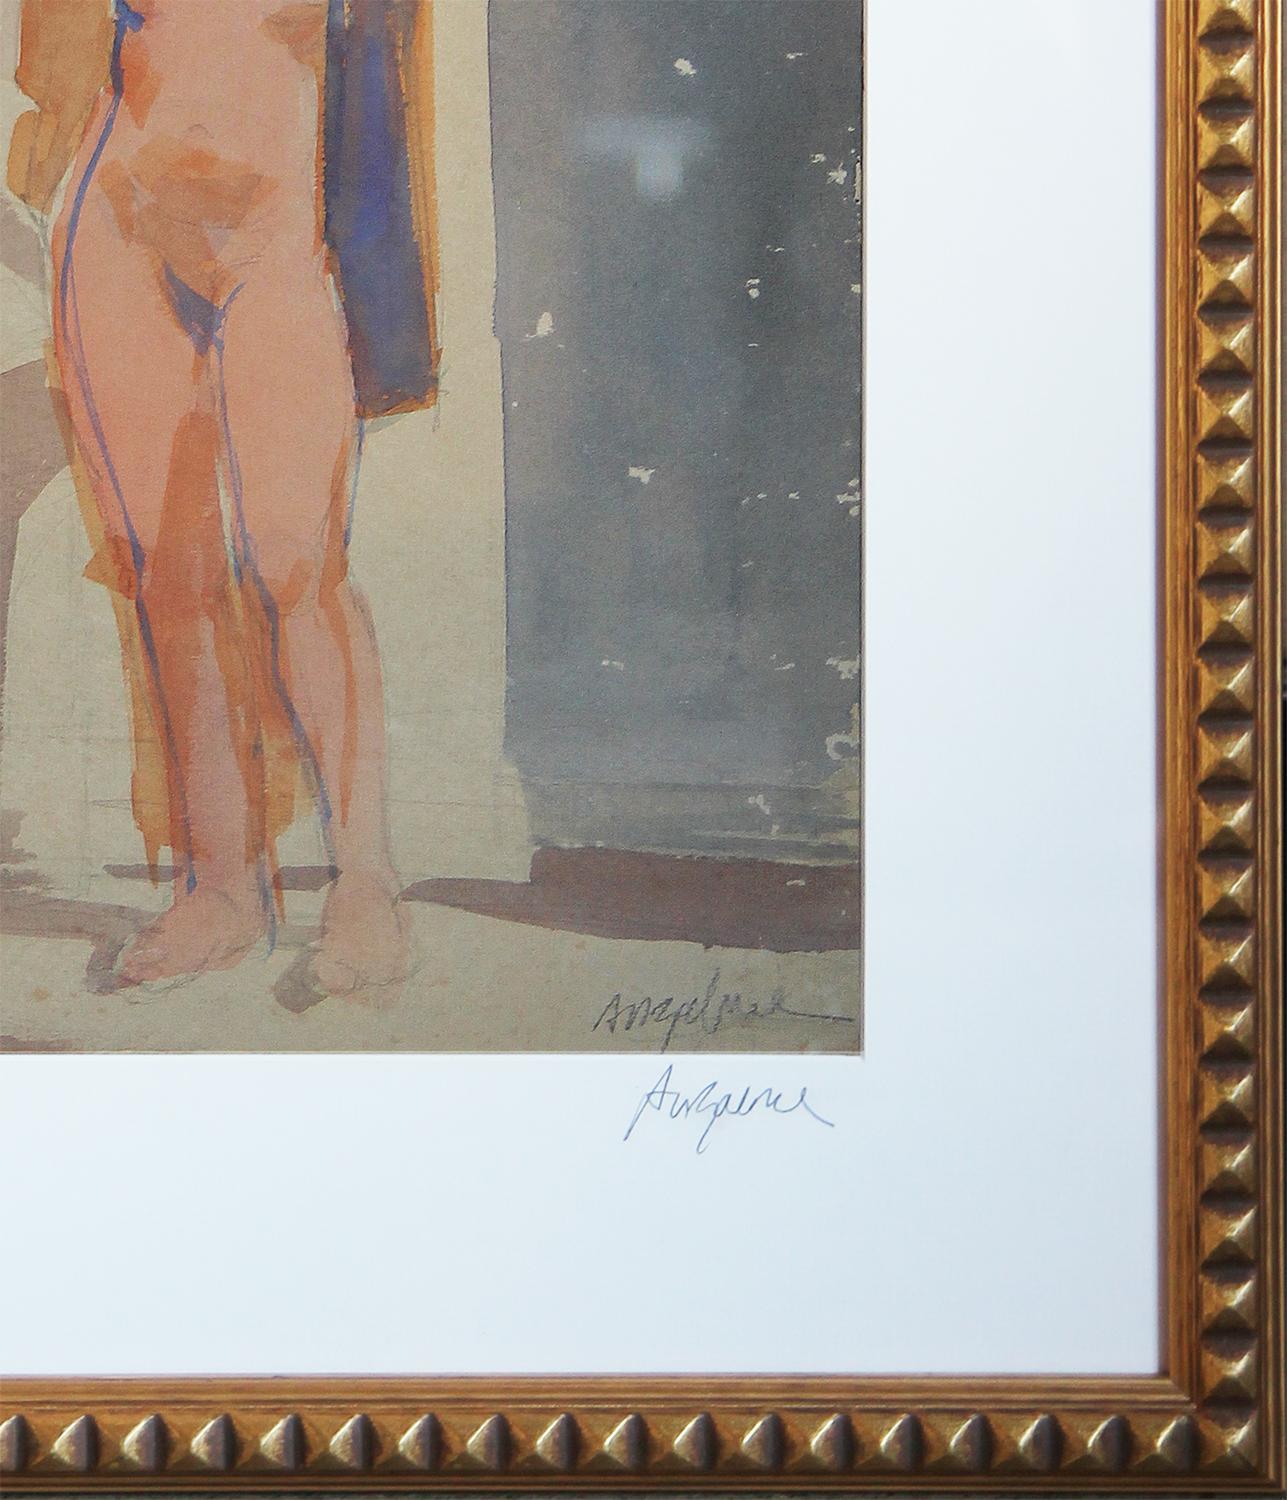 Colorful figurative drawing by Texas artist William Anzalone. The drawing depicts a nude woman in solitude taking off her robe. Signed by the artist at the bottom right. Framed in a beautiful black modern frame.

Dimensions Without Frame: H 16 in. x